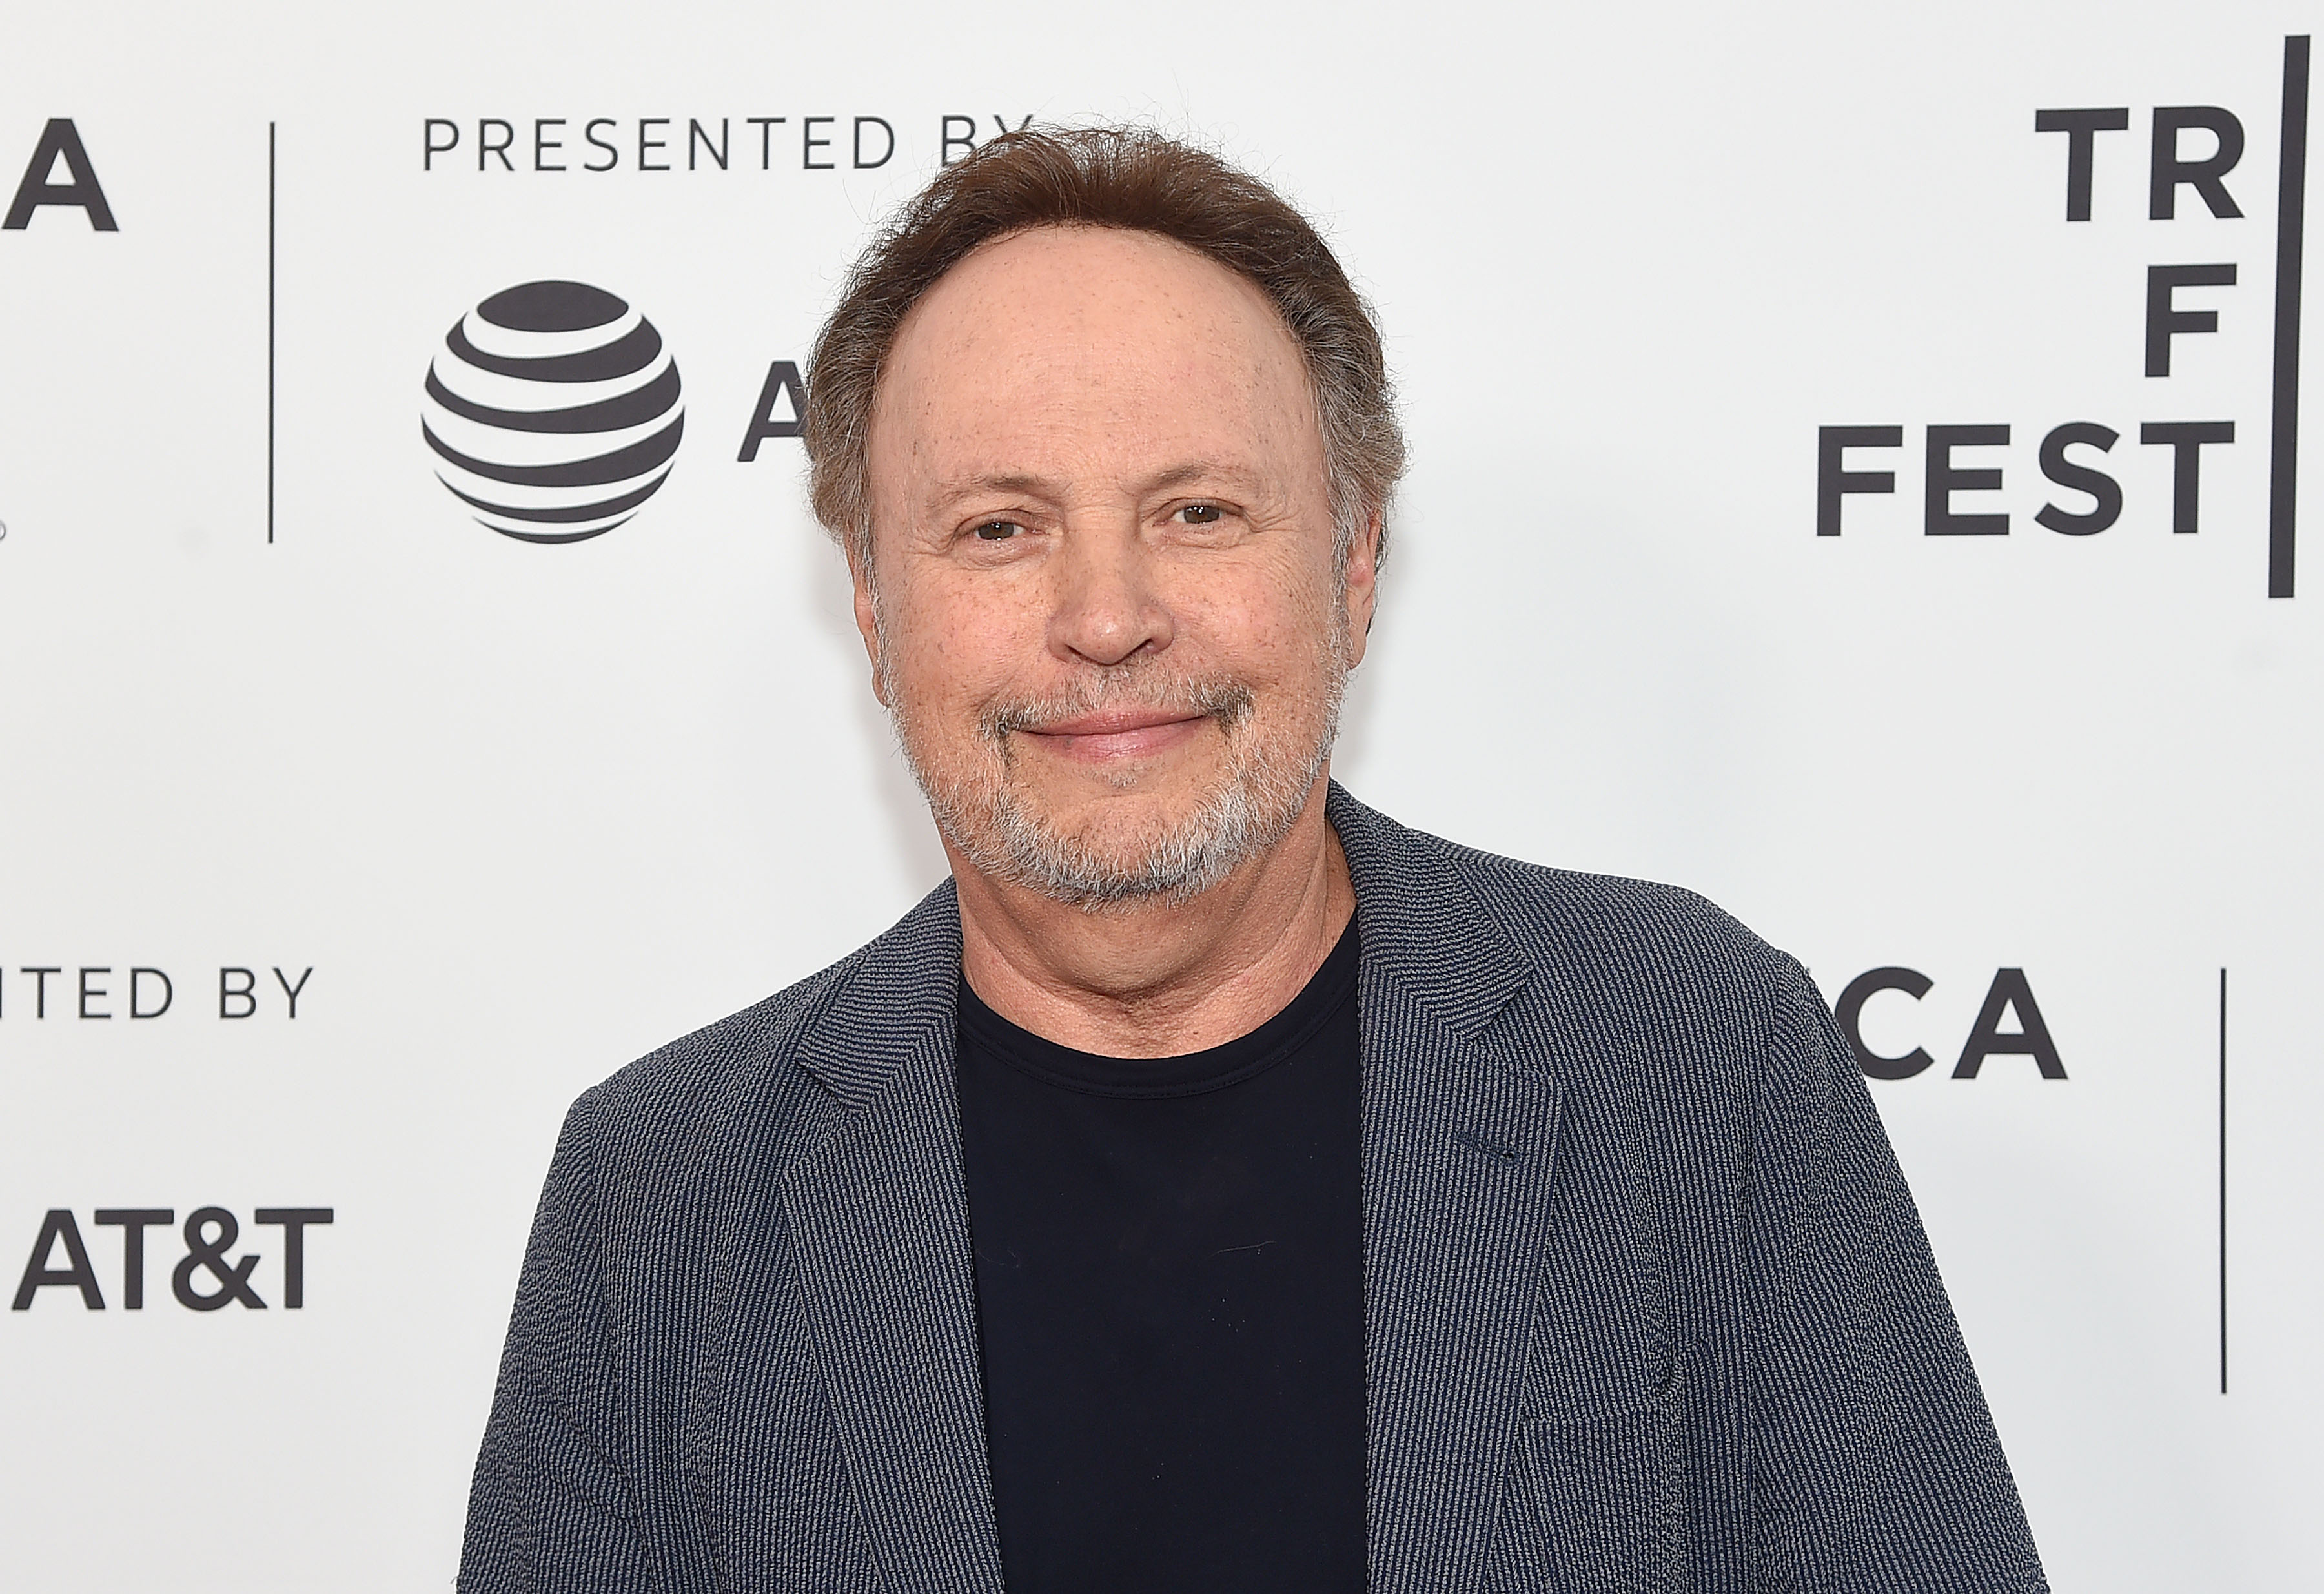  Billy Crystal attends the 'Standing Up, Falling Down' screening at the 2019 Tribeca Film Festival at SVA Theater 